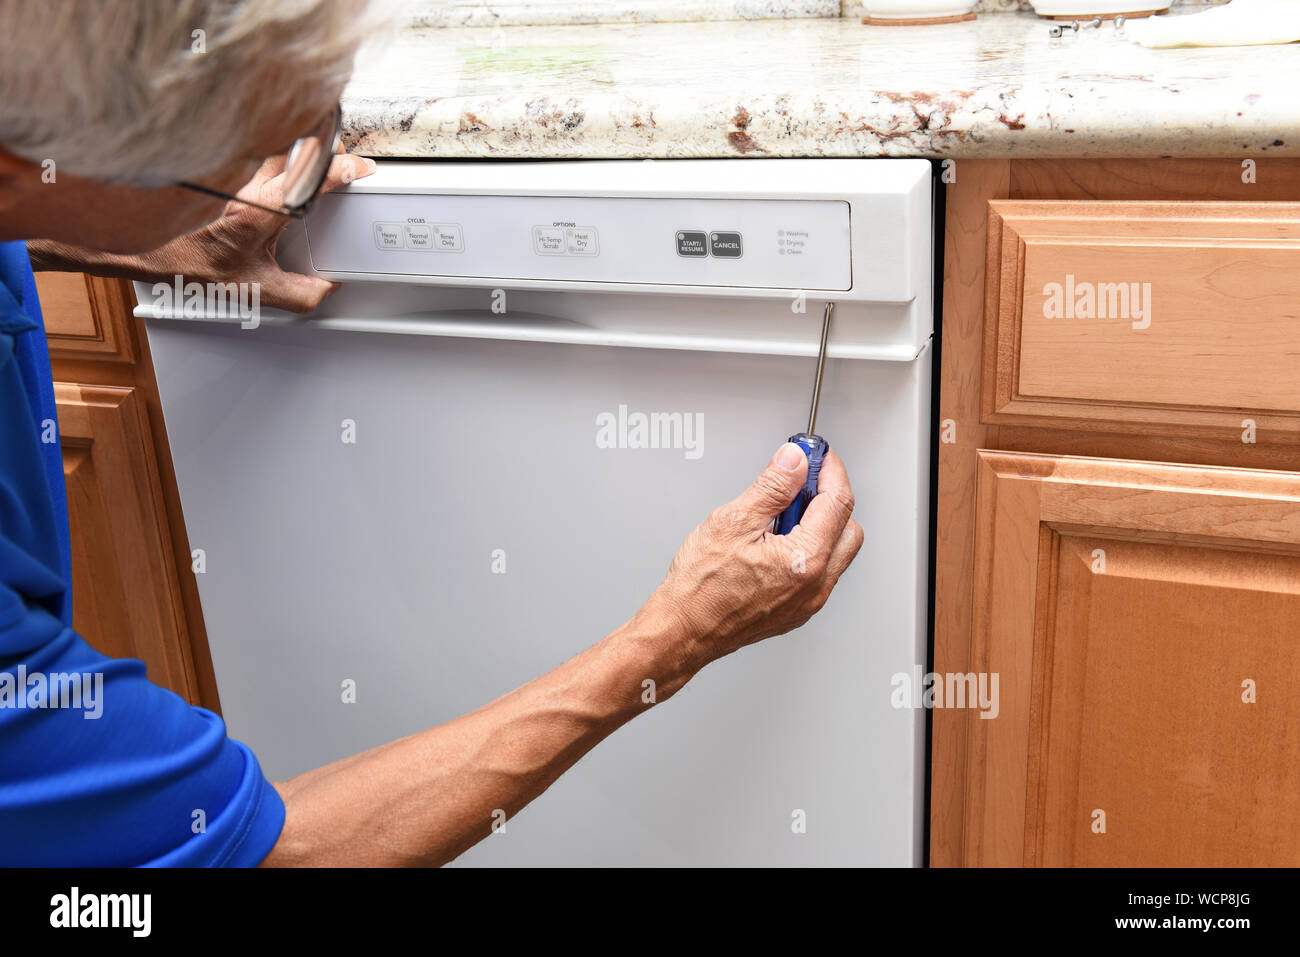 Closeup of a appliance repairman using a screwdriver to remove the control panel on a broken dishwasher. Stock Photo